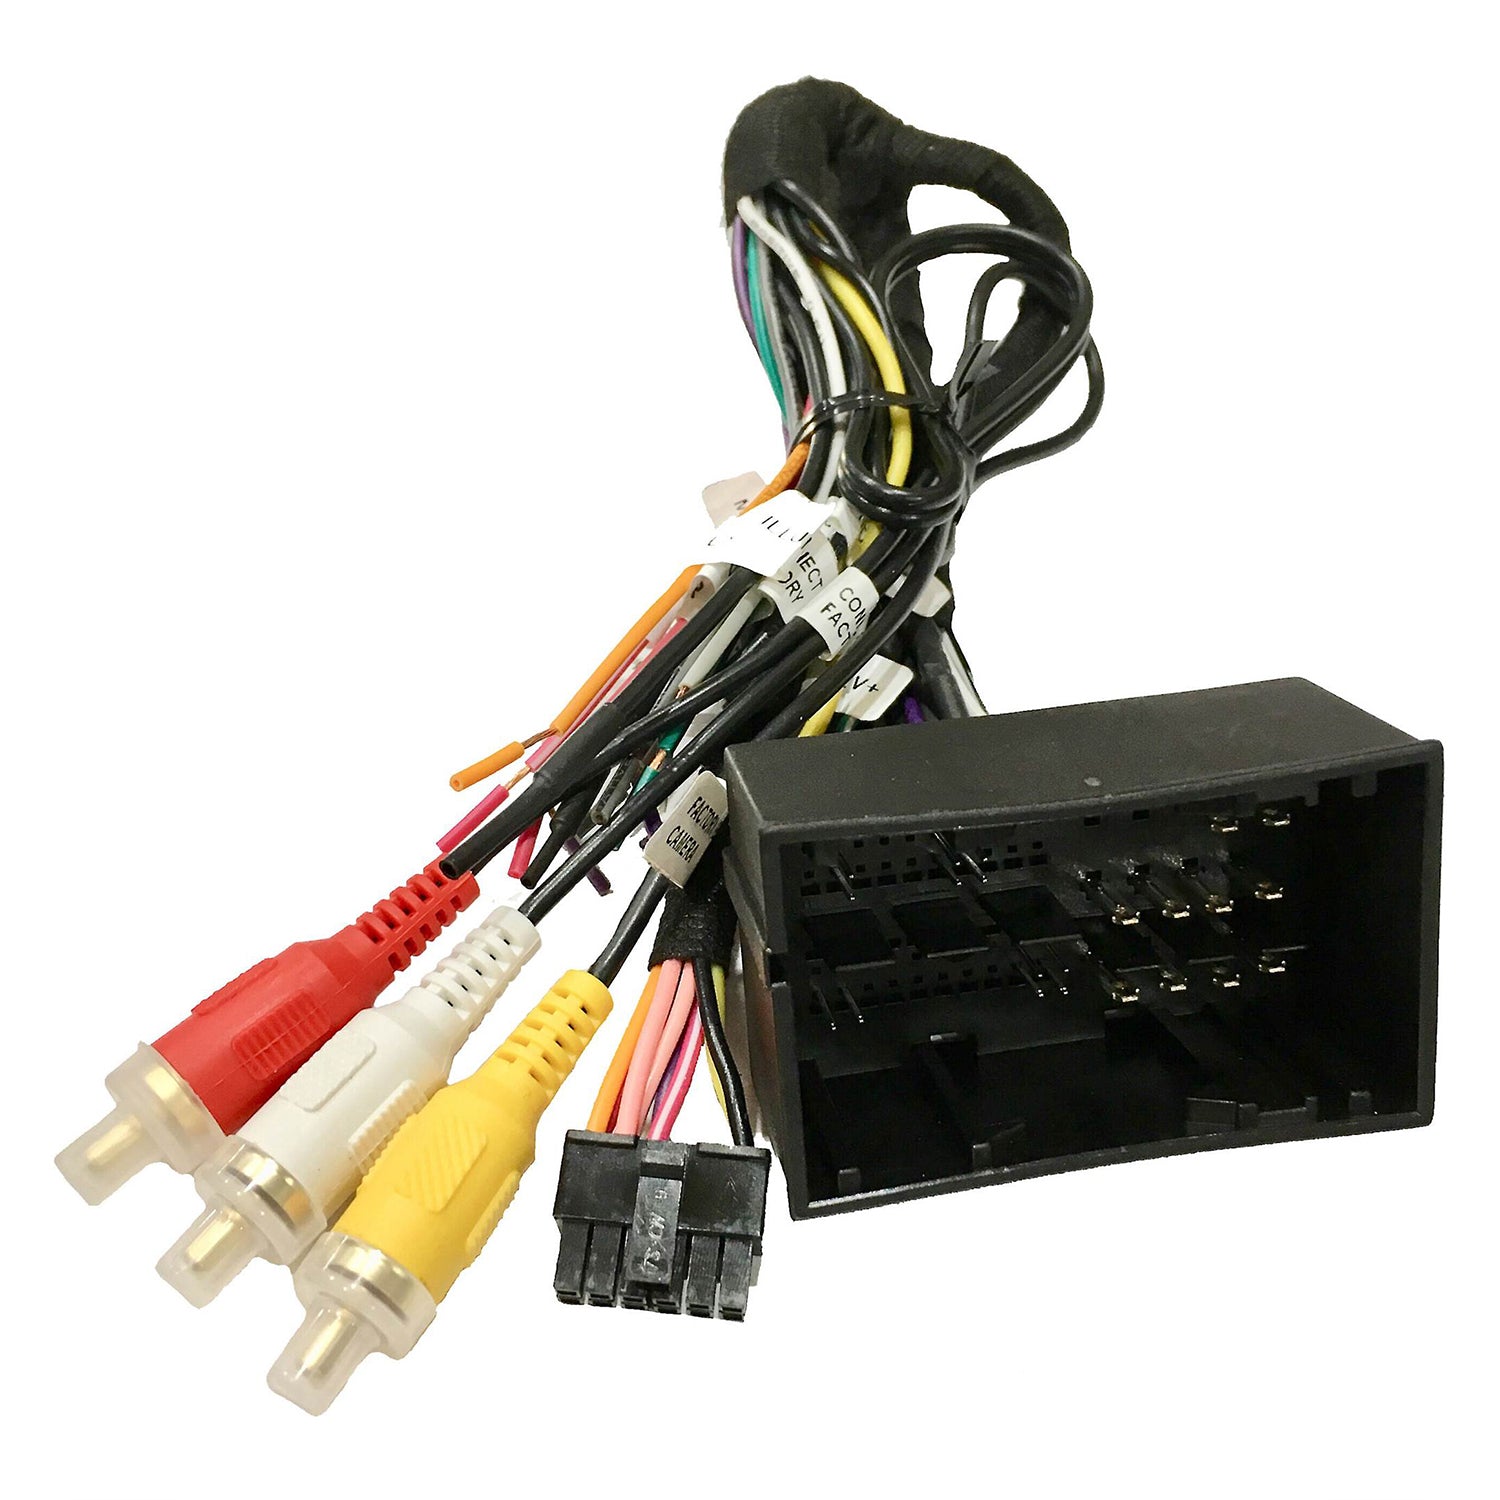 Crux SWRCR-59LV Radio Replacement Interface For 2013-Up Dodge Fiat Jeep Ram